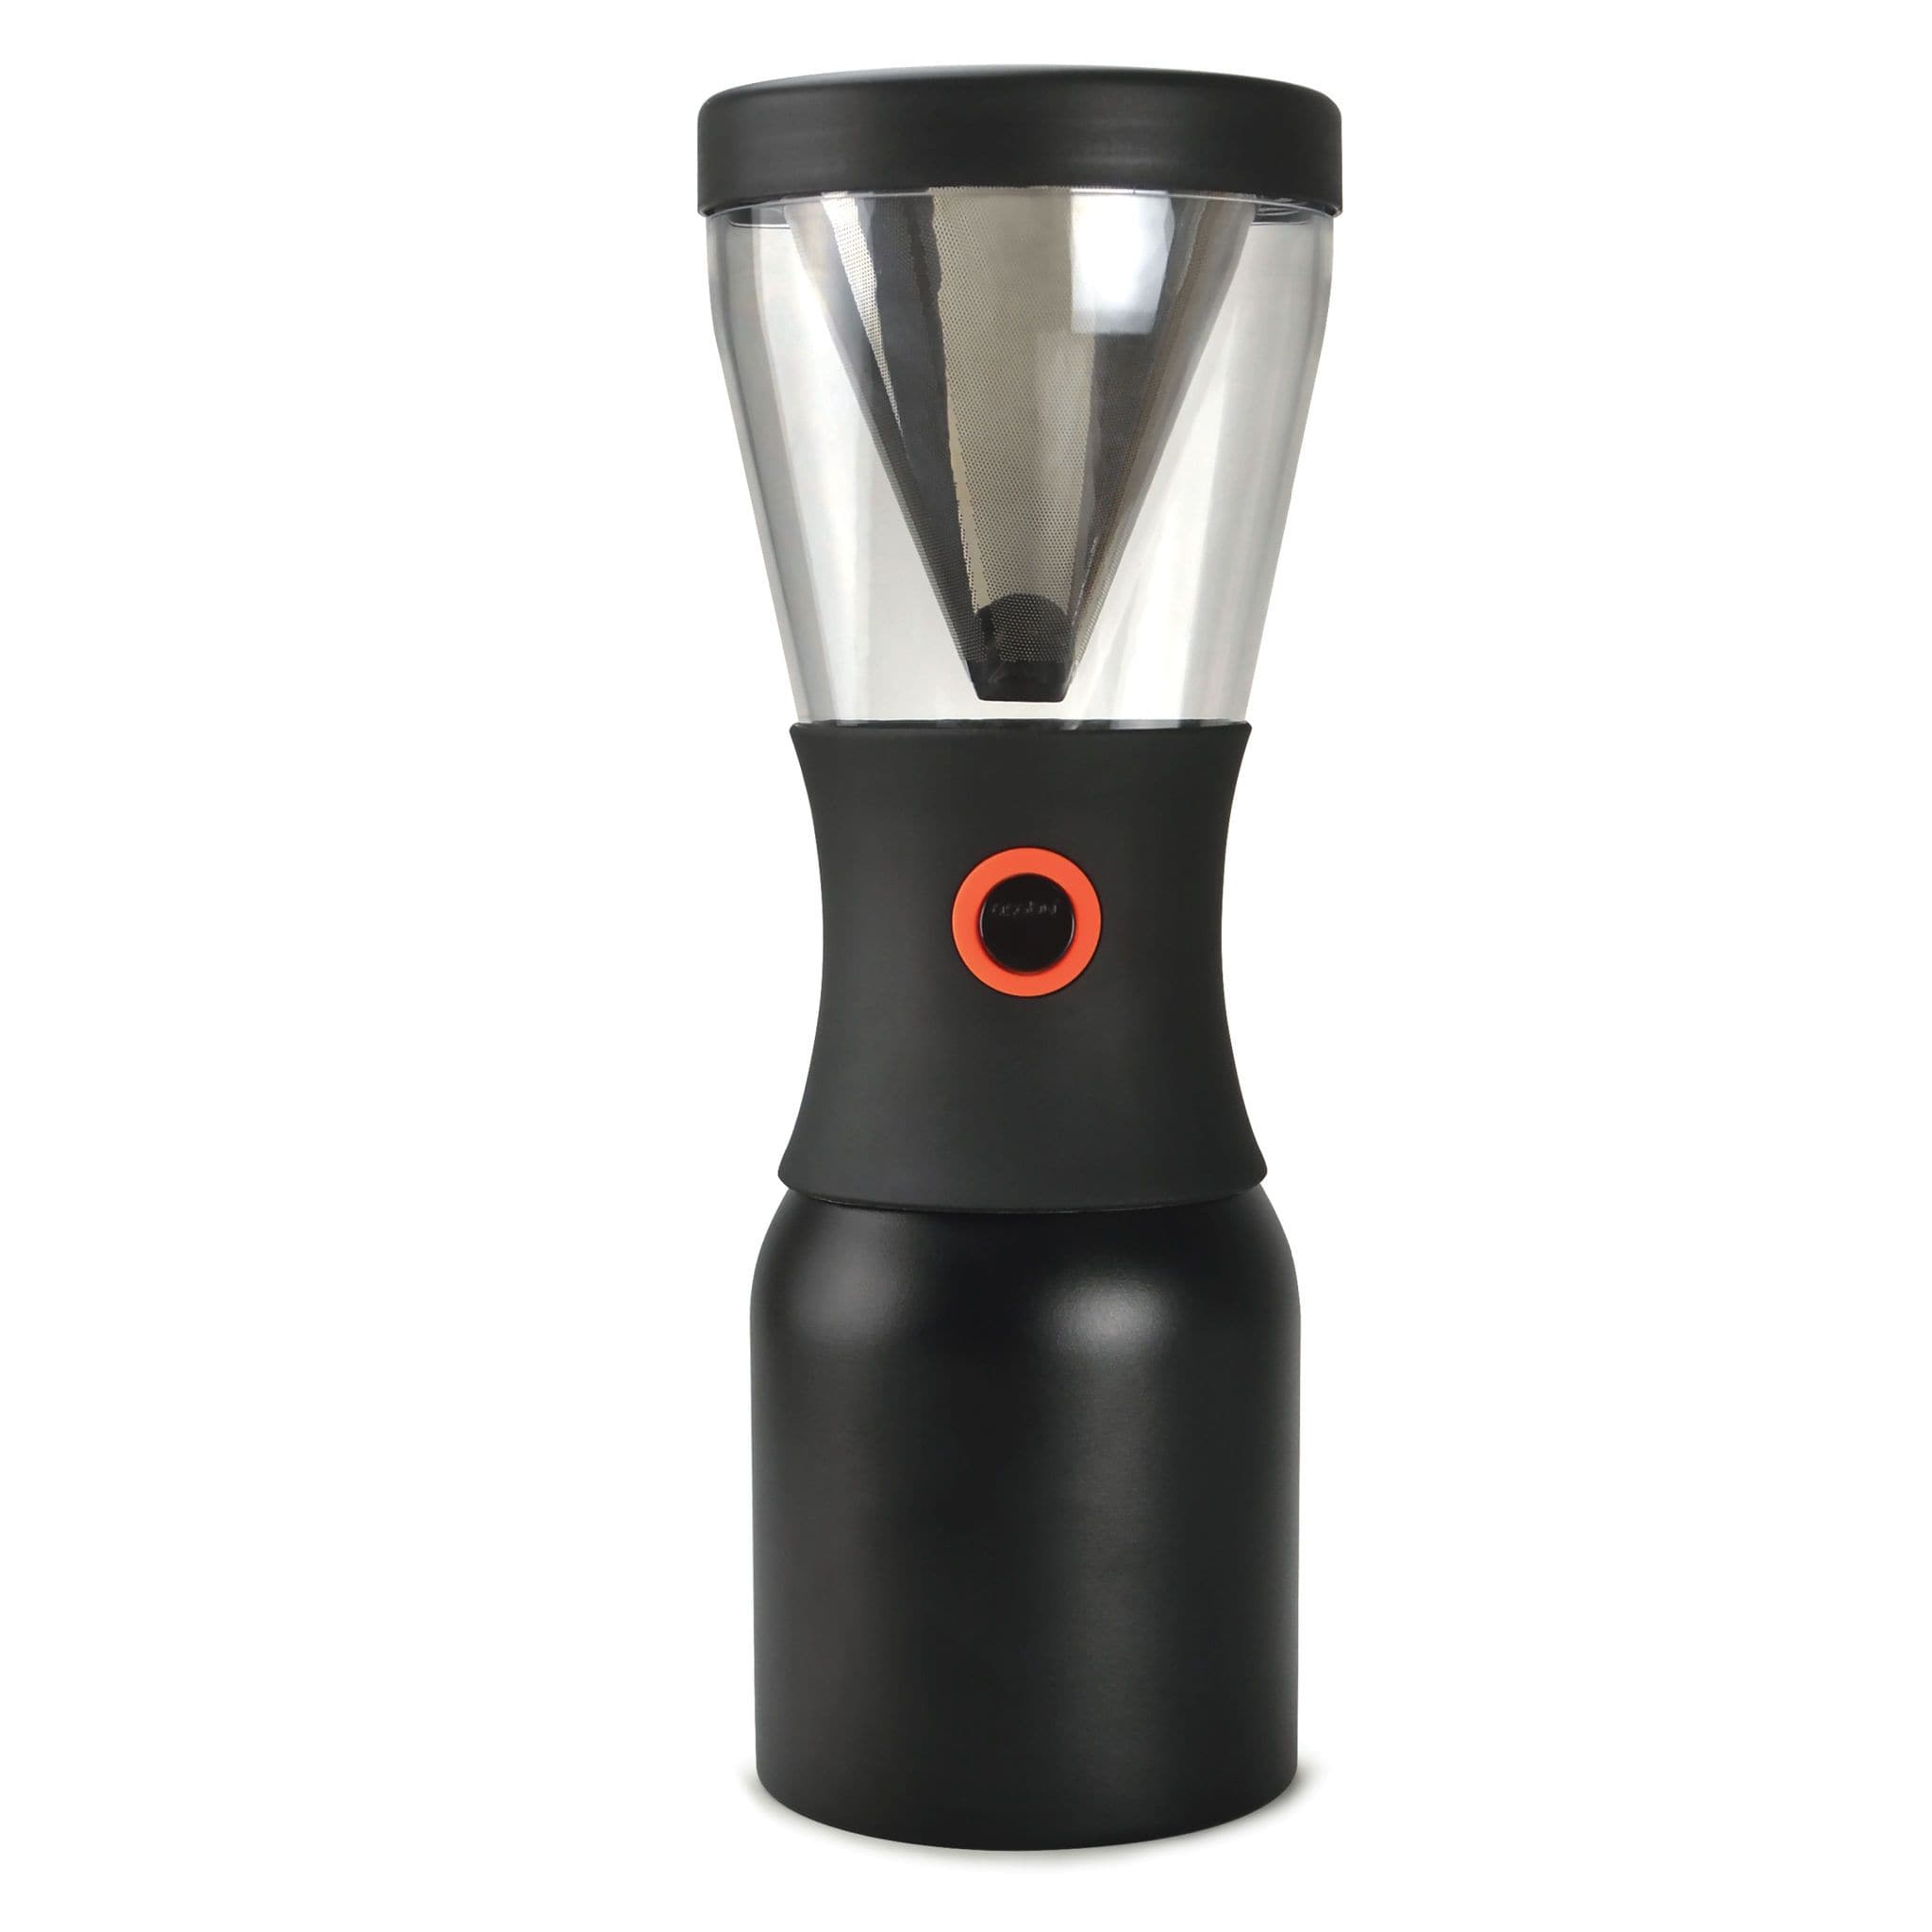 The Asobu Cold Brew Coffee Maker is 50% off & can make the perfect